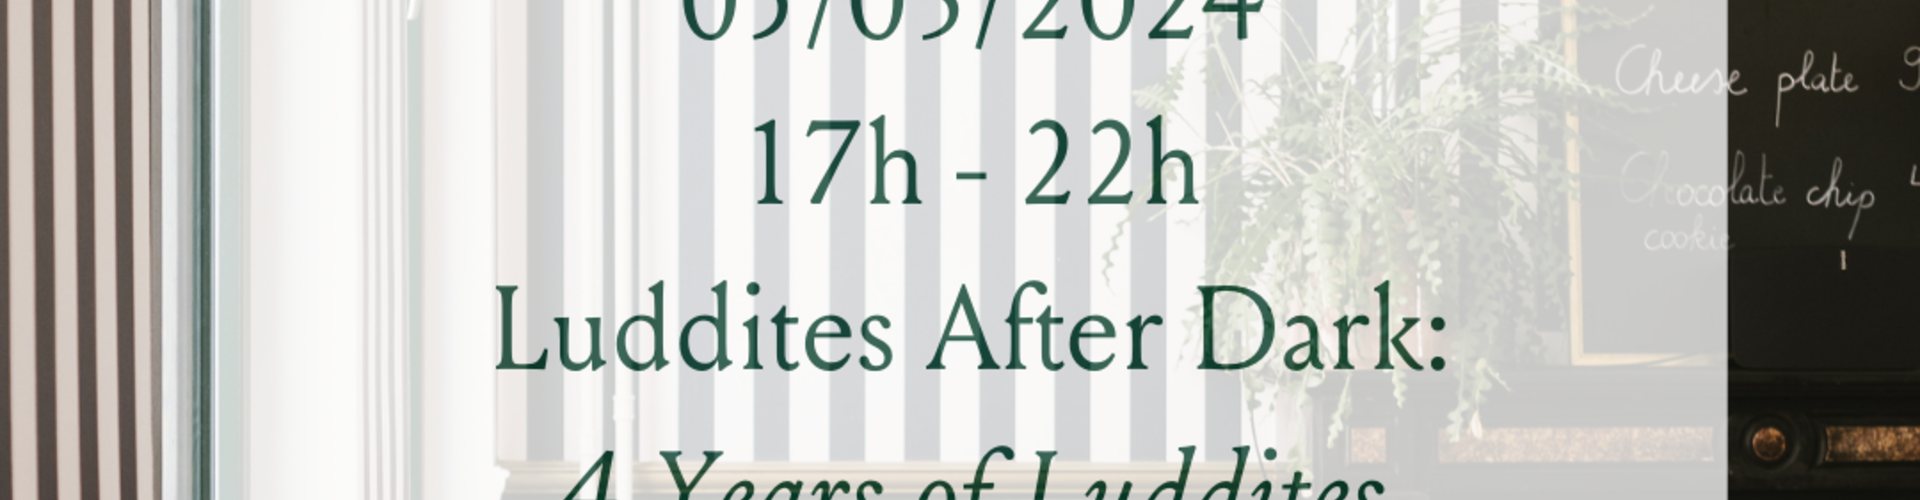 05/03 - Luddites After Dark: Our 4th Anniversary 